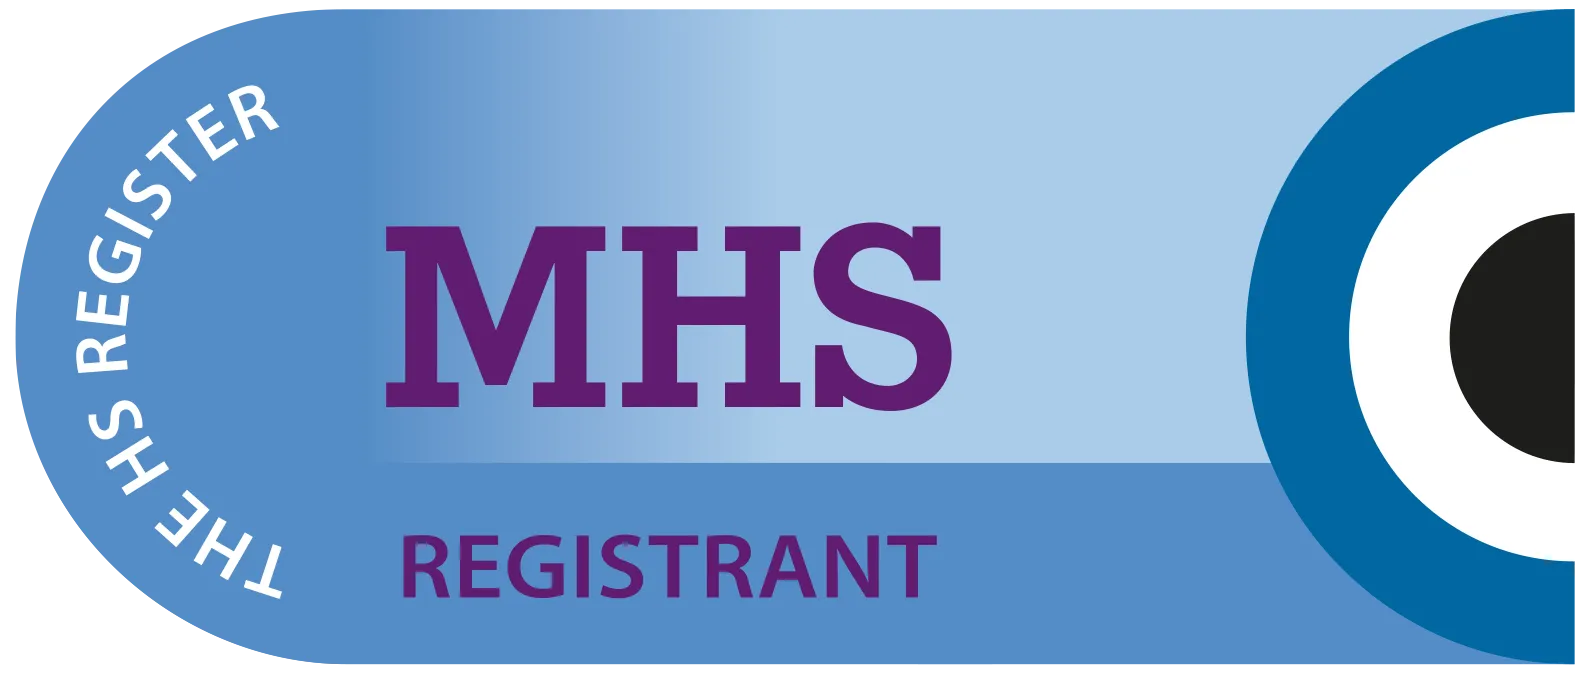 MHS registrant logo on the about me page